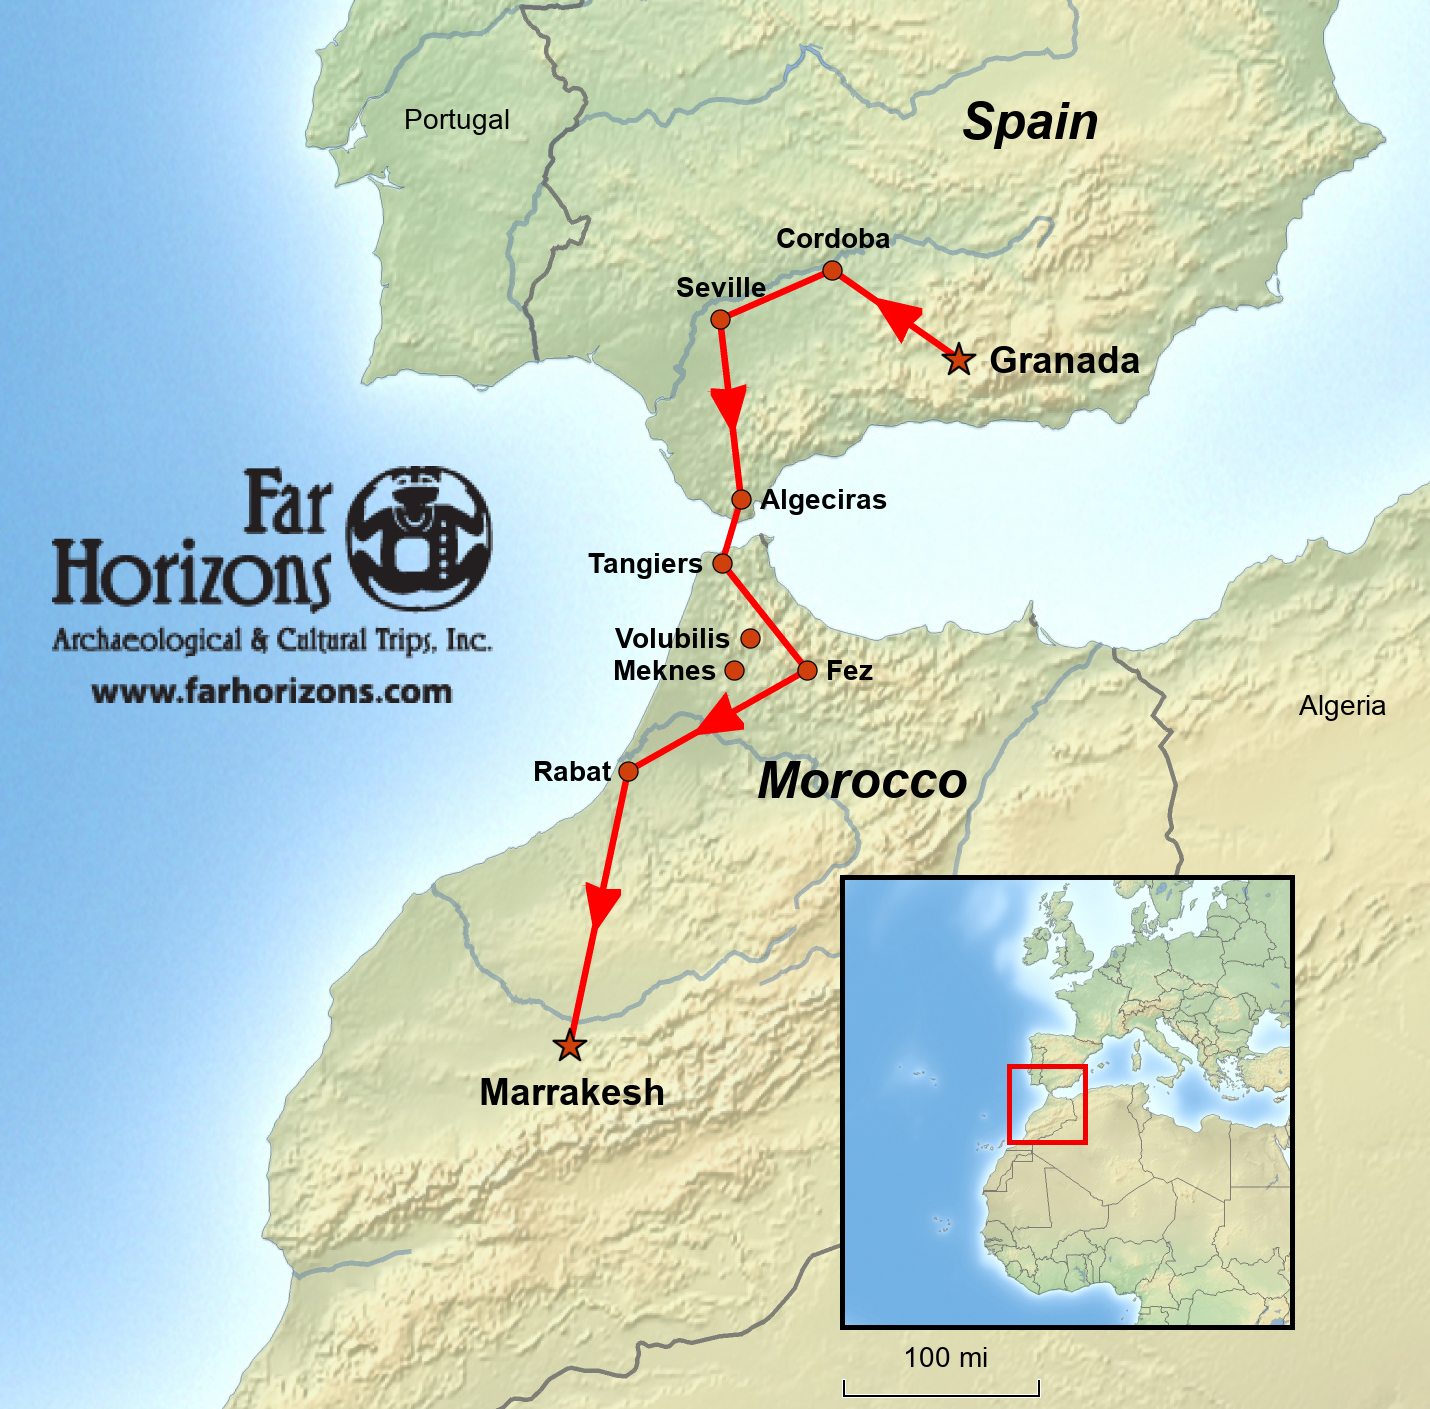 spain-and-morocco-tour-map-far-horizons-archaeological-cultural